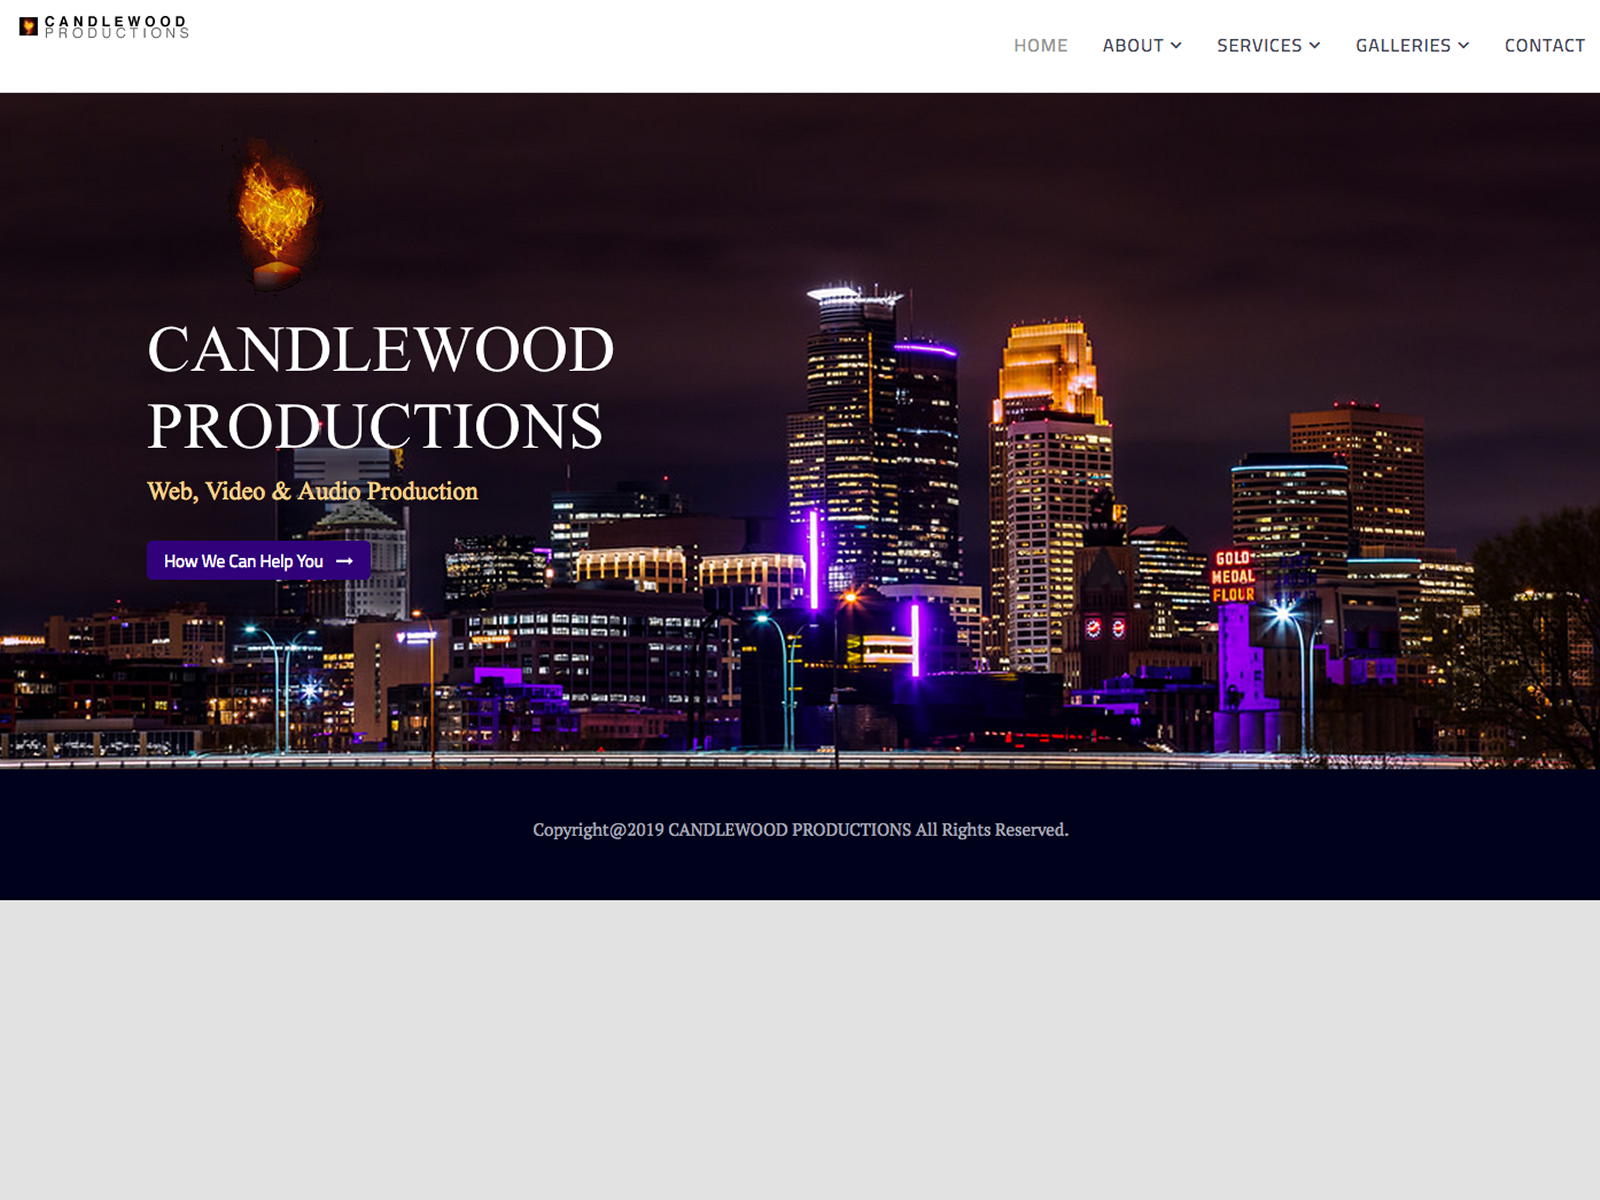 CandlewoodProductions.com